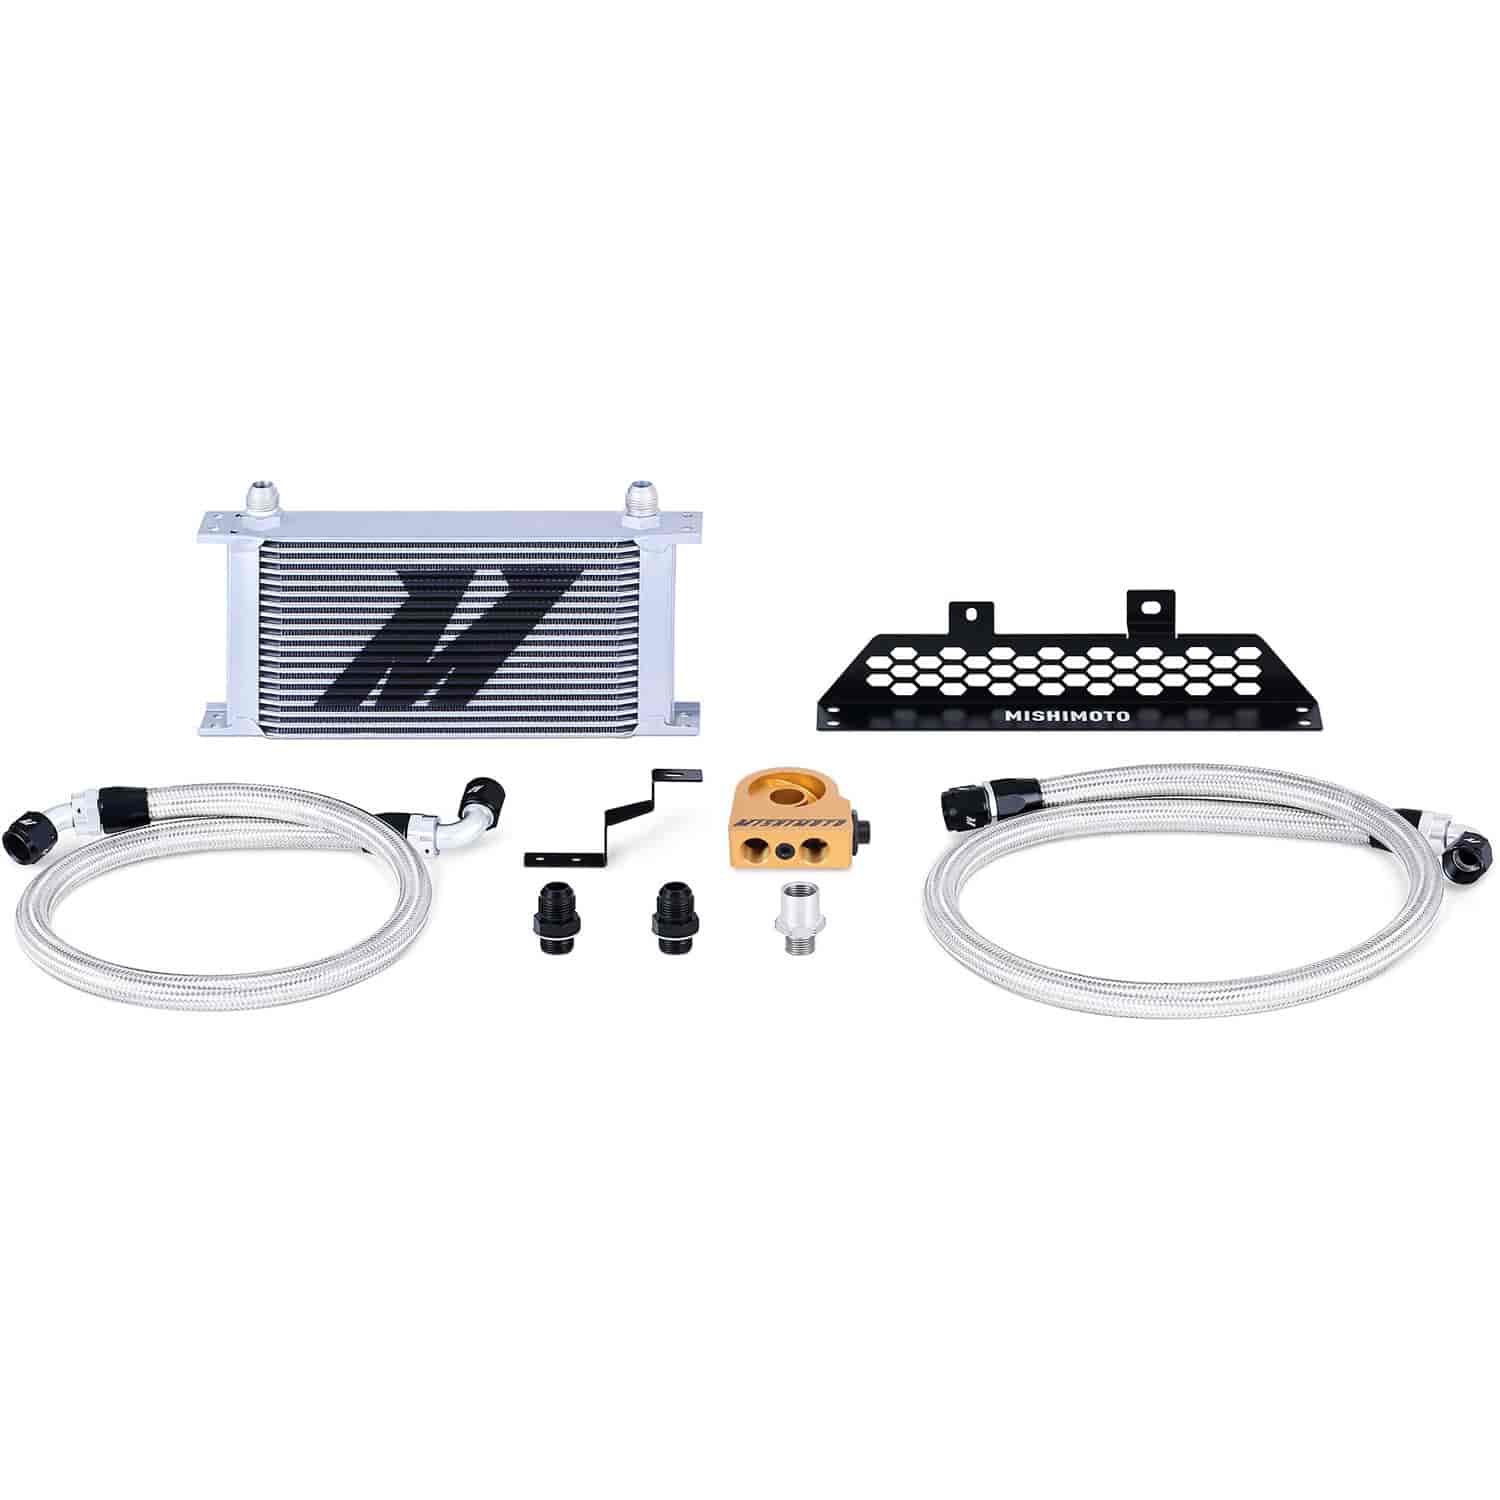 Ford Focus ST Oil Cooler Kit - MFG Part No. MMOC-FOST-13T